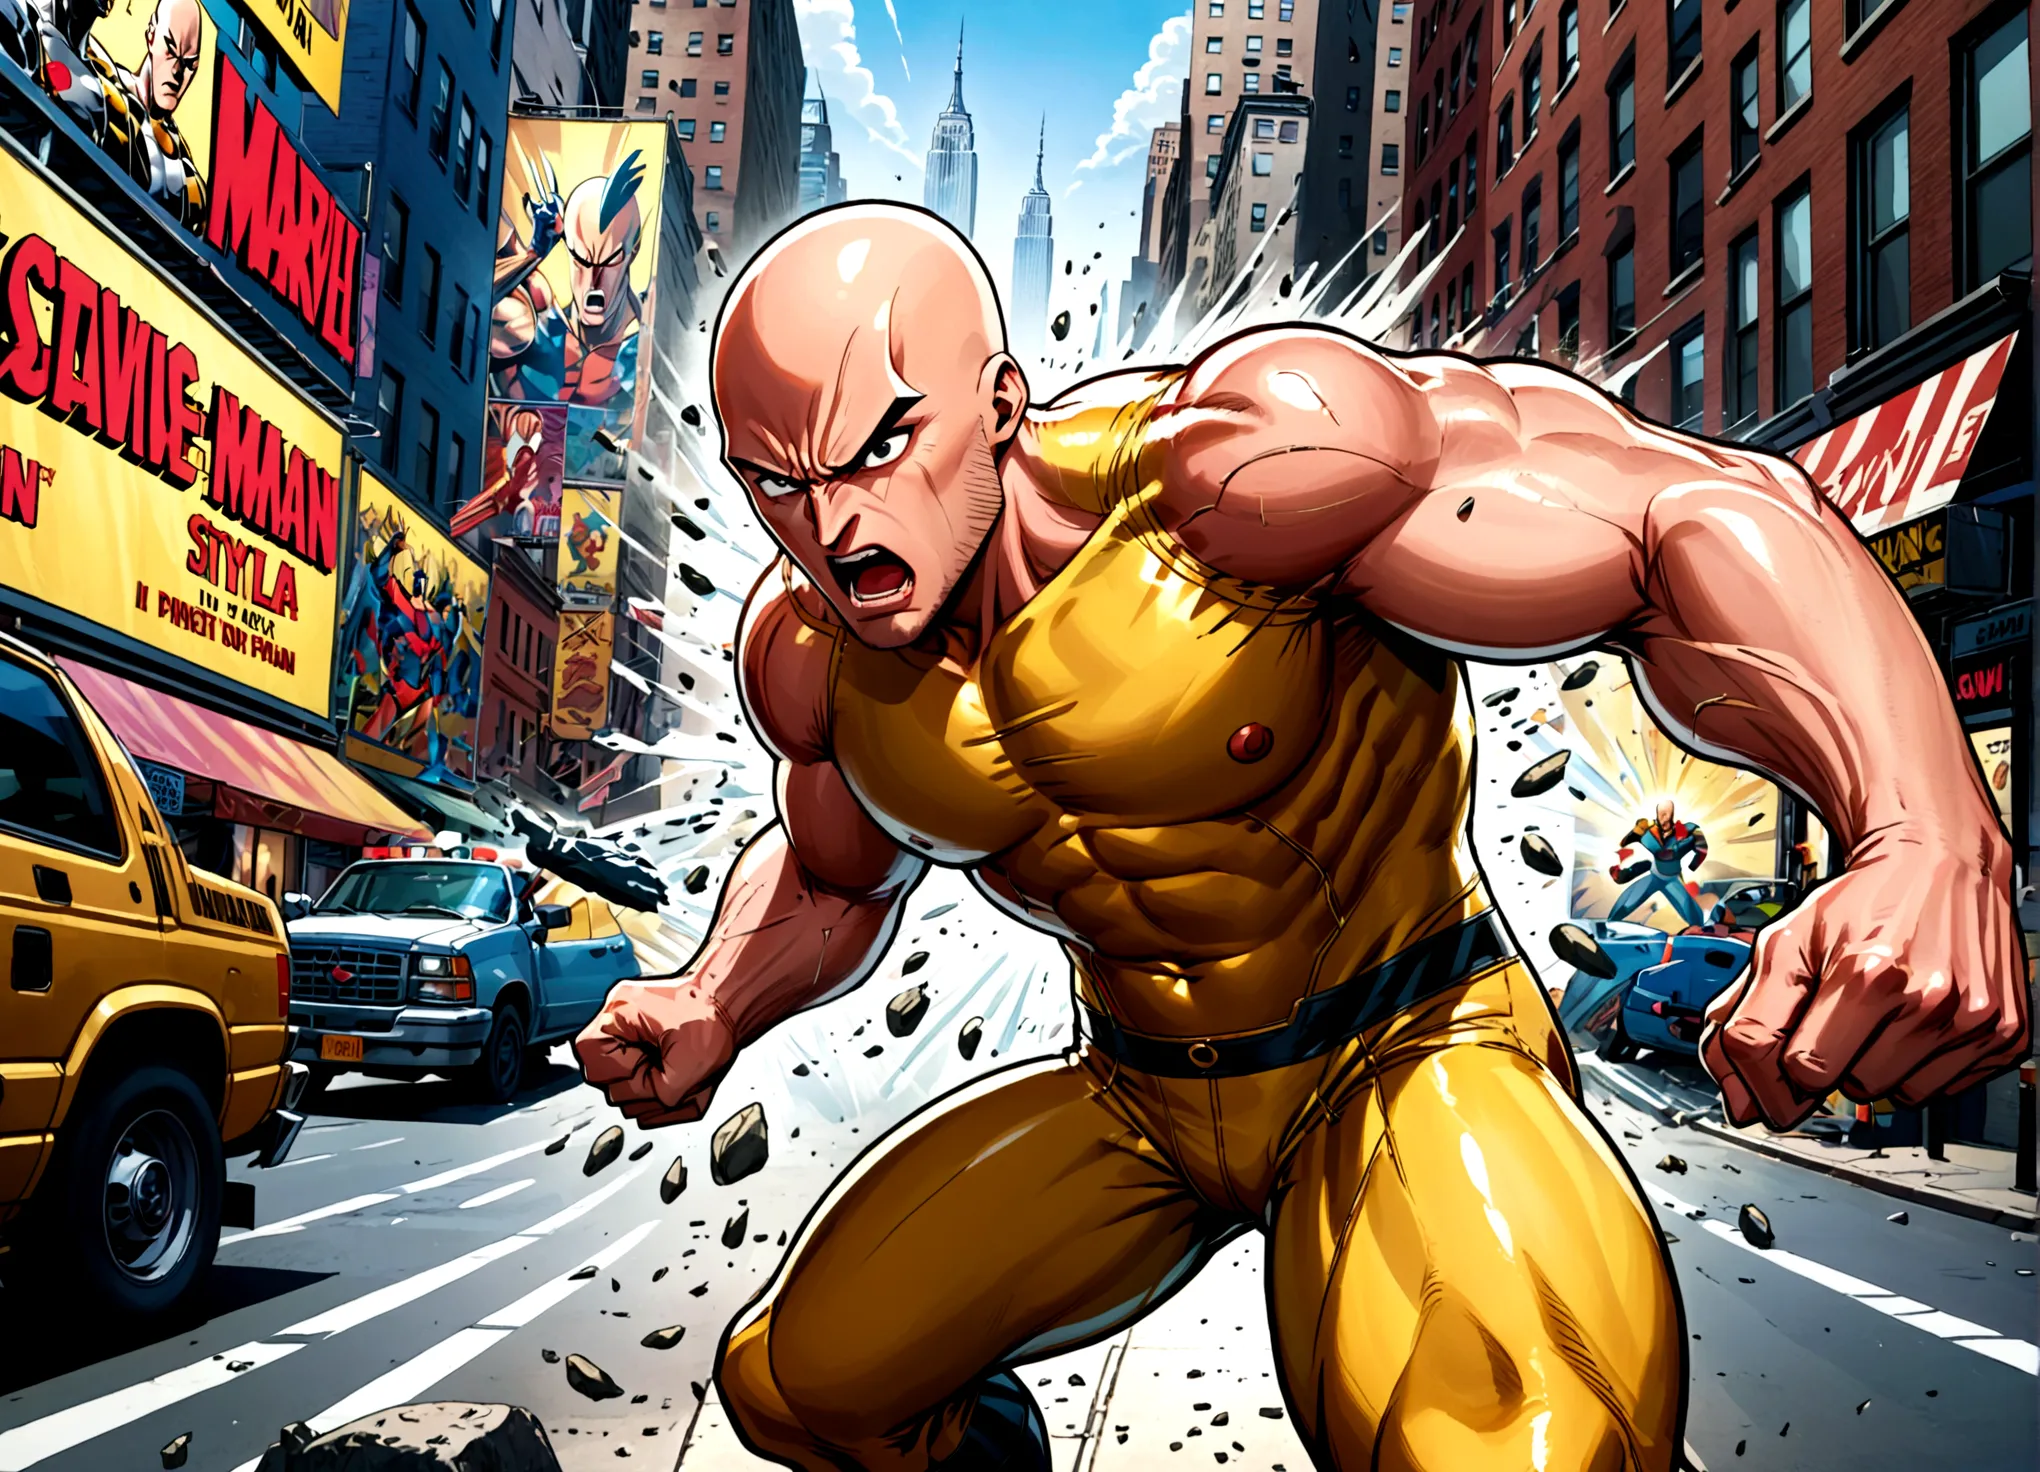 Marvel's Wolverine (90s comic style) is enraged, claws out ready to fight, One punch man Saitama is not impressed. set in new yo...